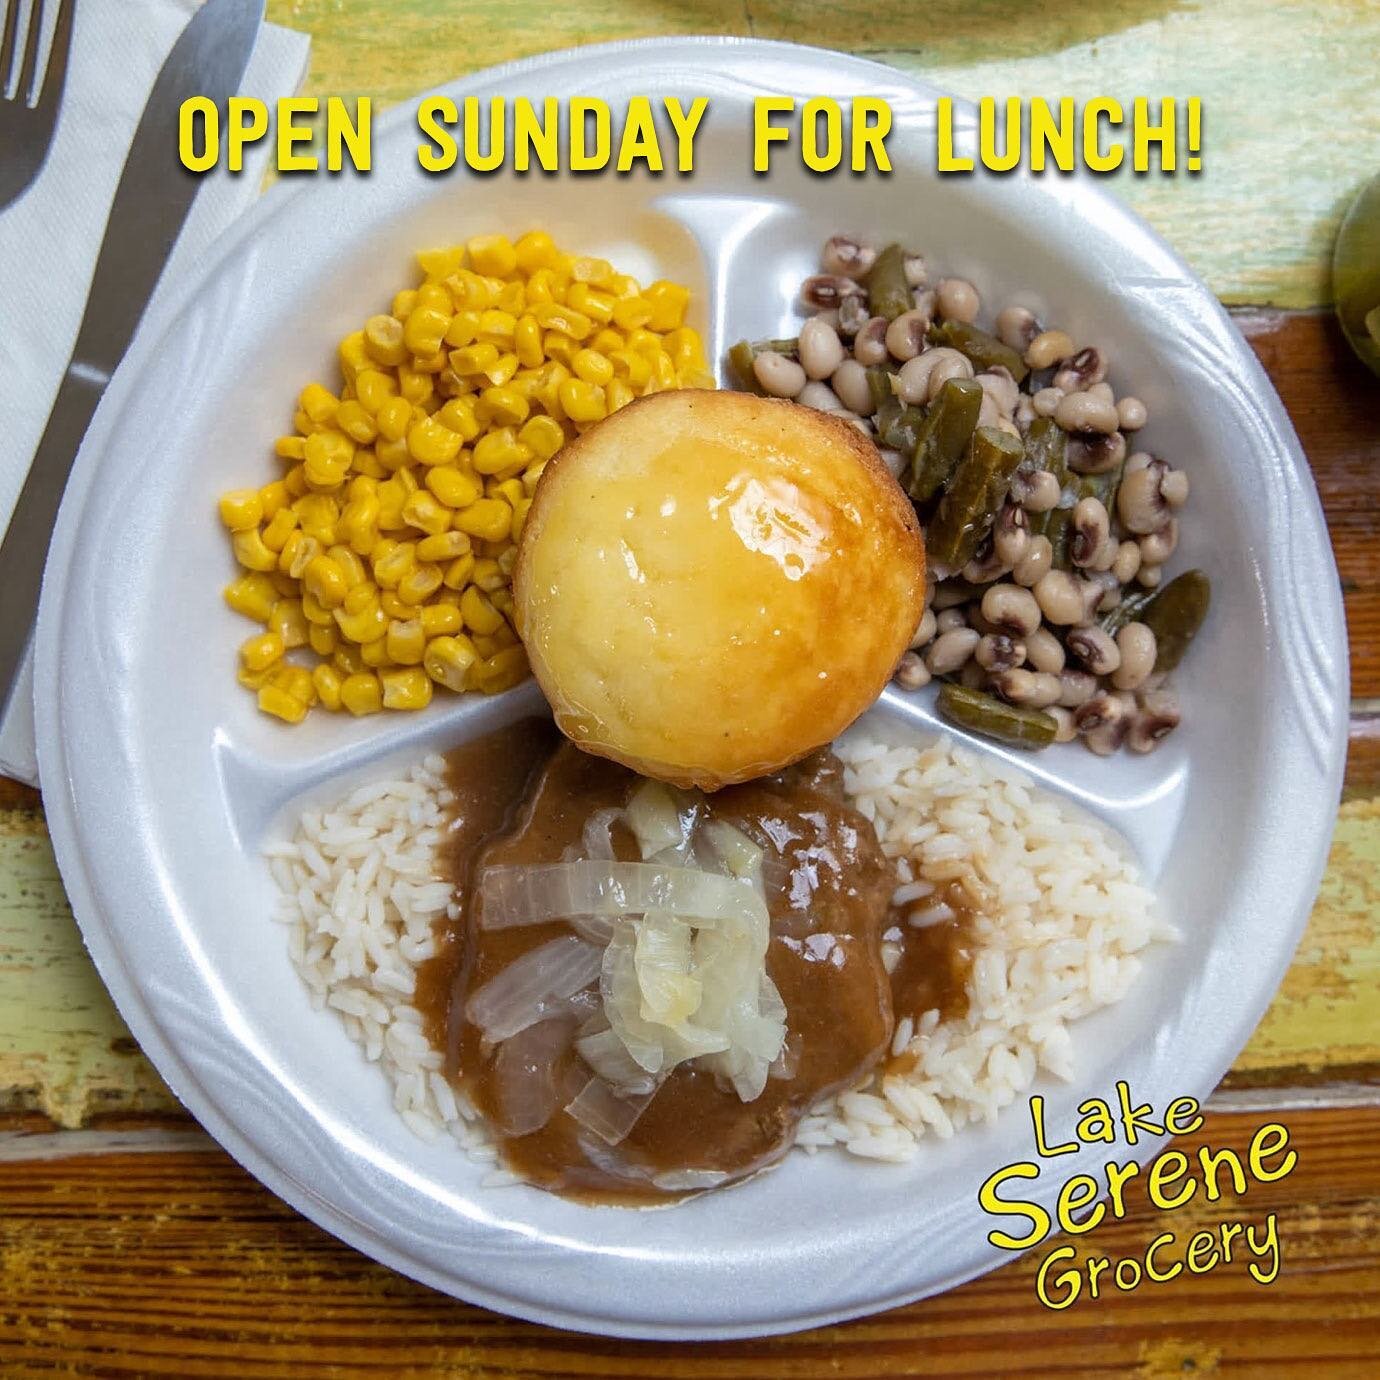 Join us for SUNDAY LUNCH! The Kitchen and Grill will be open for normal lunch hours at our Hwy 98 location! Hamburger Steak, Fried Chicken, Chicken Spaghetti, Vegetables and Strawberry Cake for dessert! ALSO&hellip; tomorrow is #NationalCheeseburgerD